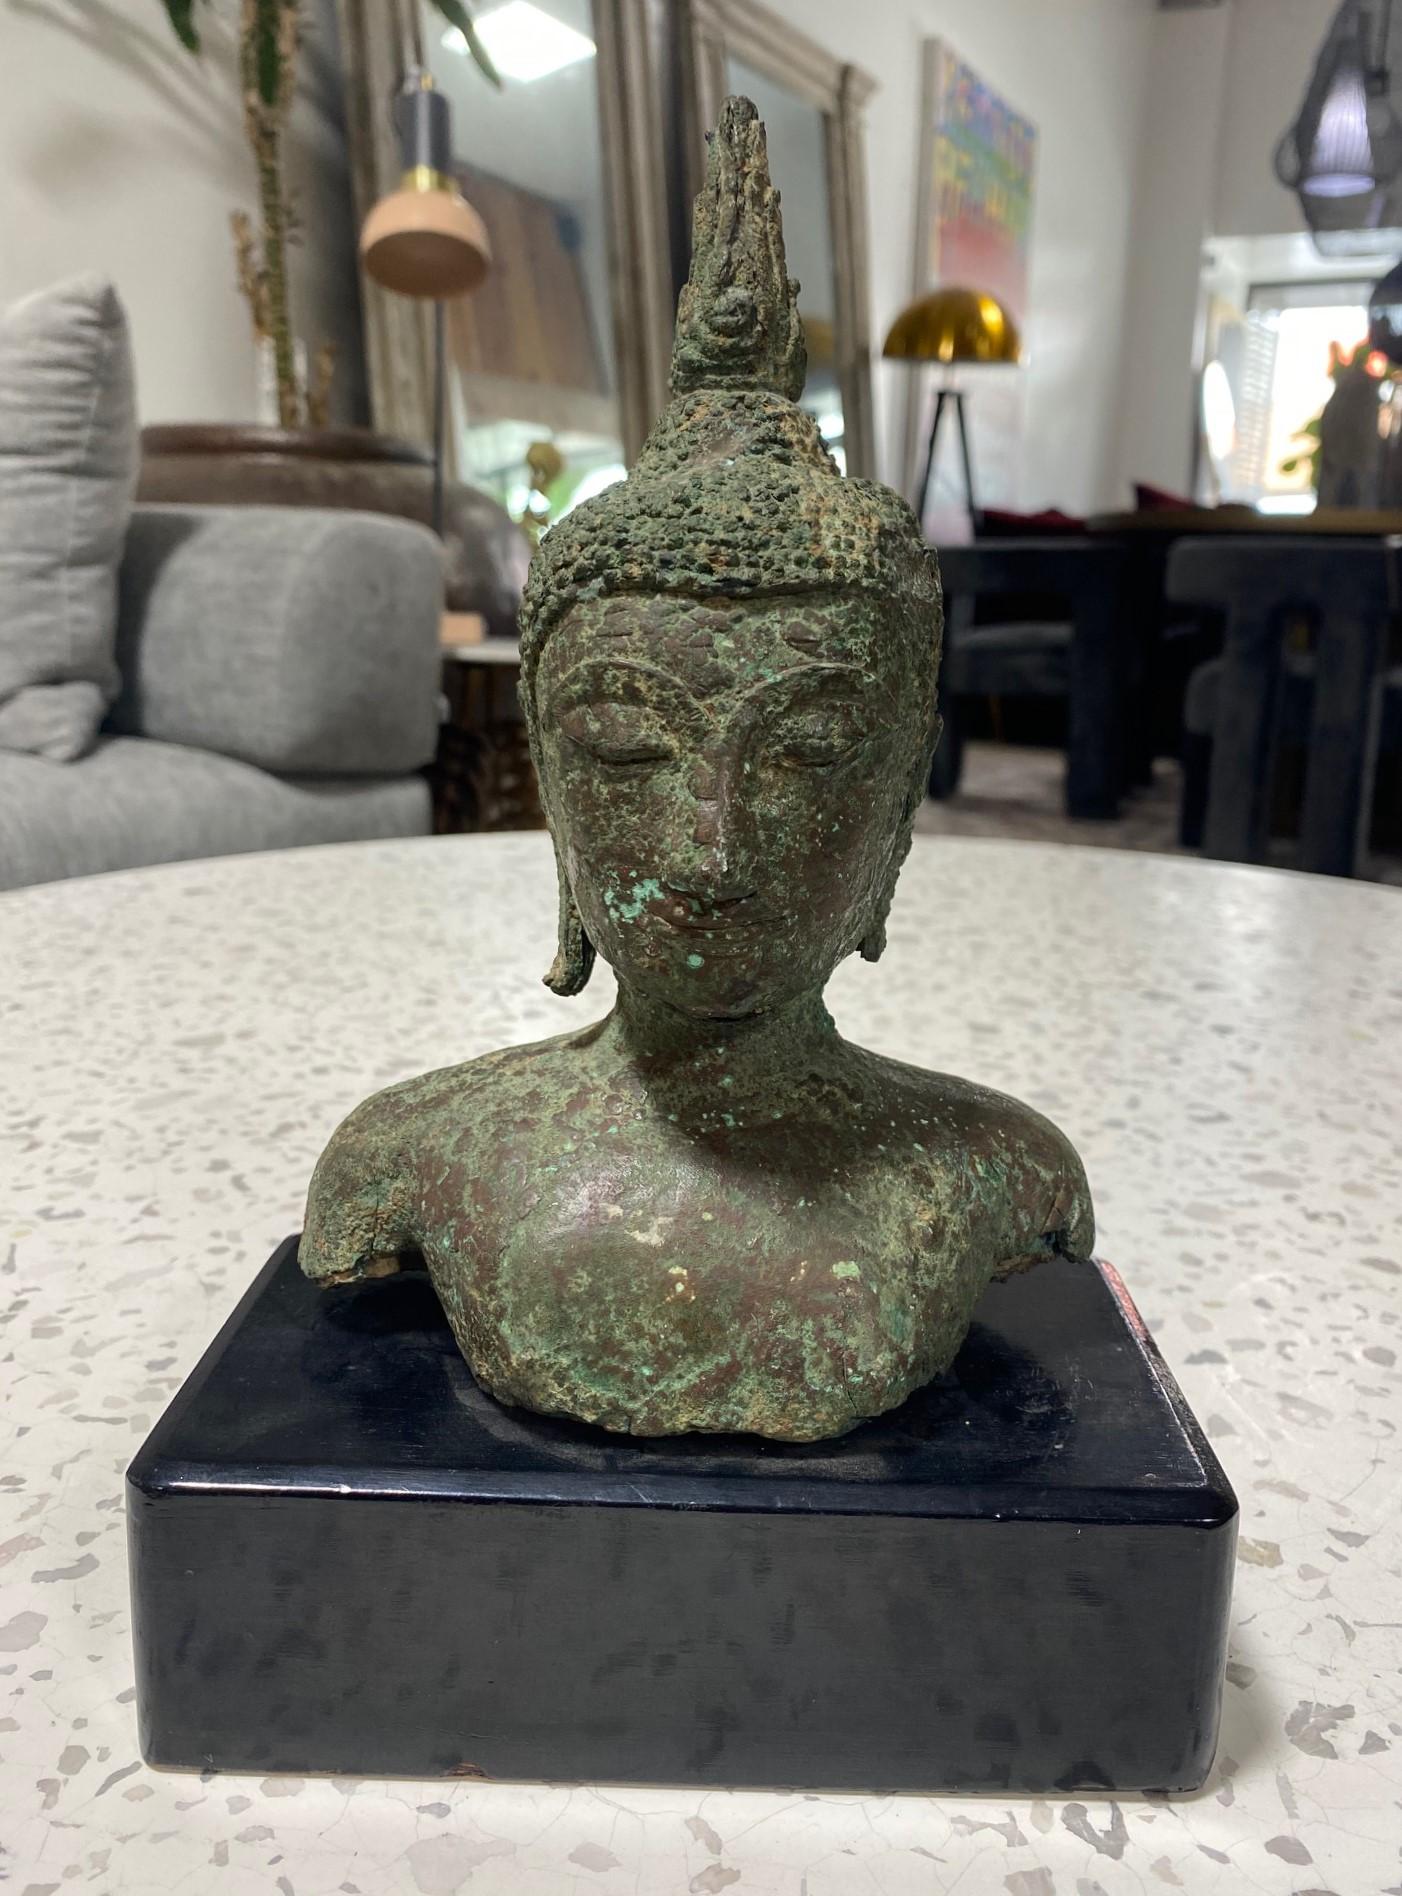 A beautifully sculpted Thai/ Siam Southeast Asian bronze Buddha head on a custom wood stand. The Buddha's eyes are closed in serene meditation. The piece has a wonderful feel and heft to it. Very well well crafted with a gorgeous natural organic